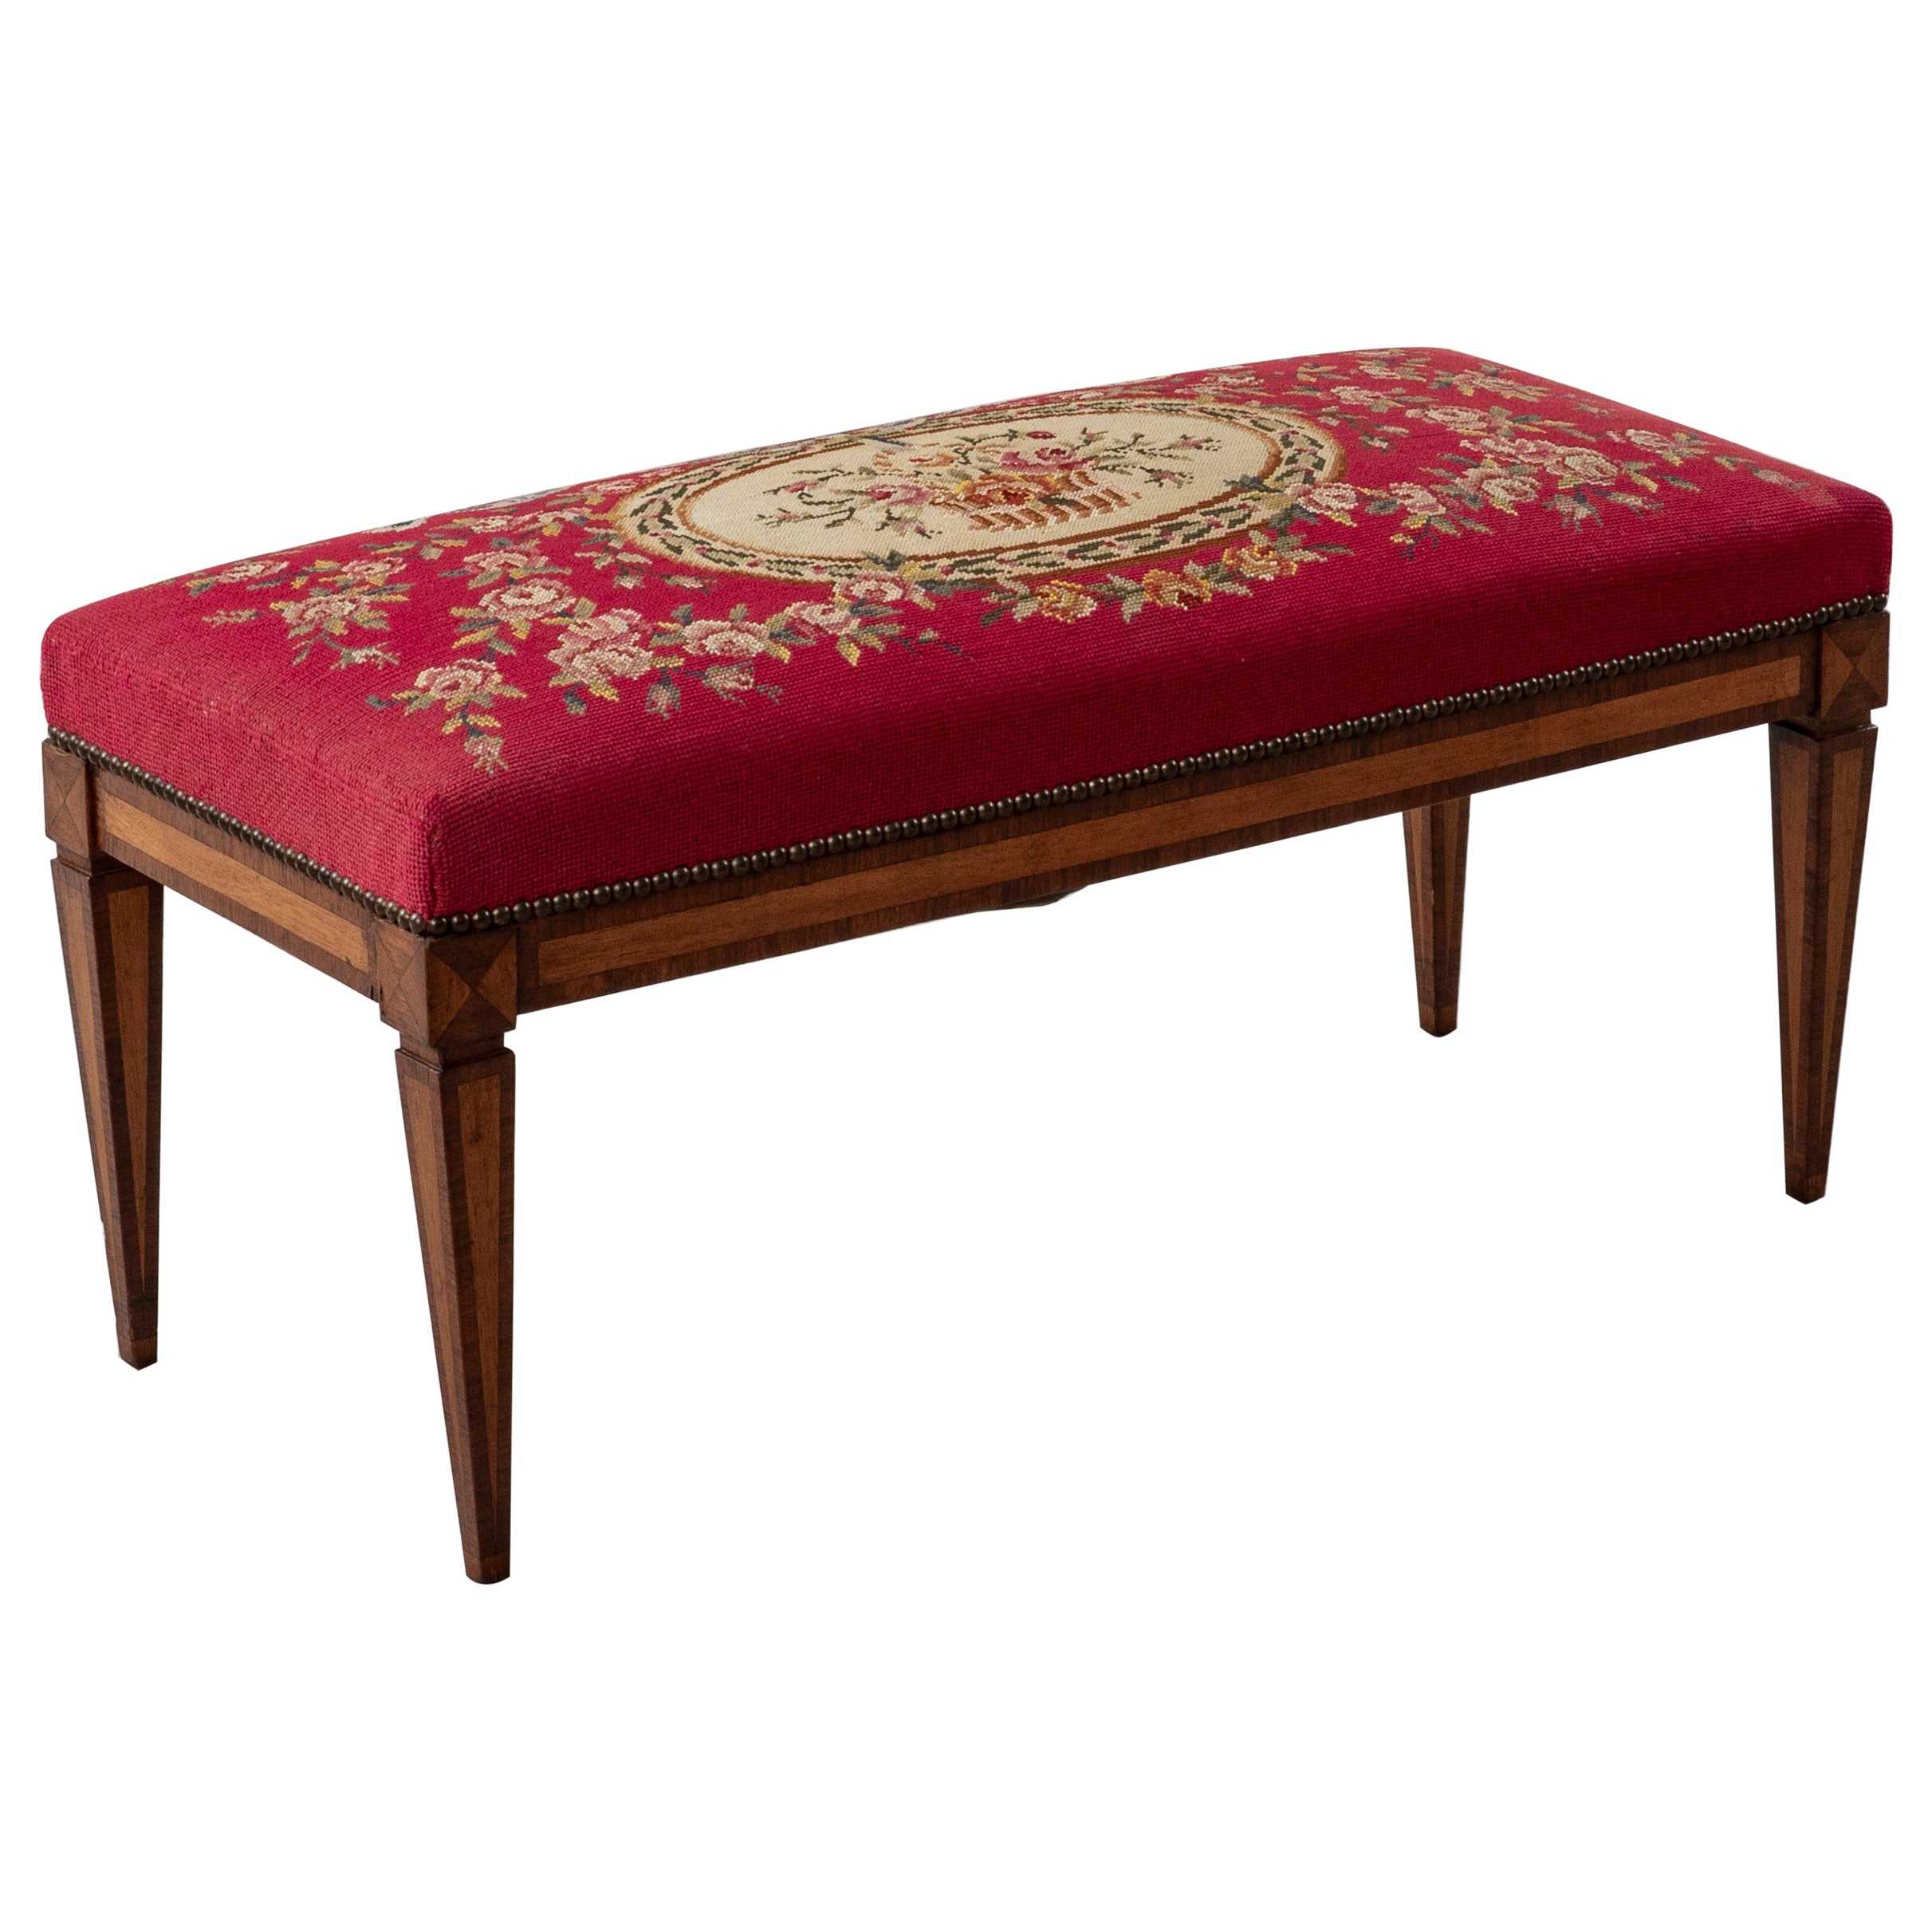 19th Century French Louis XVI Style Marquetry Bench, Banquette, Needlepoint 